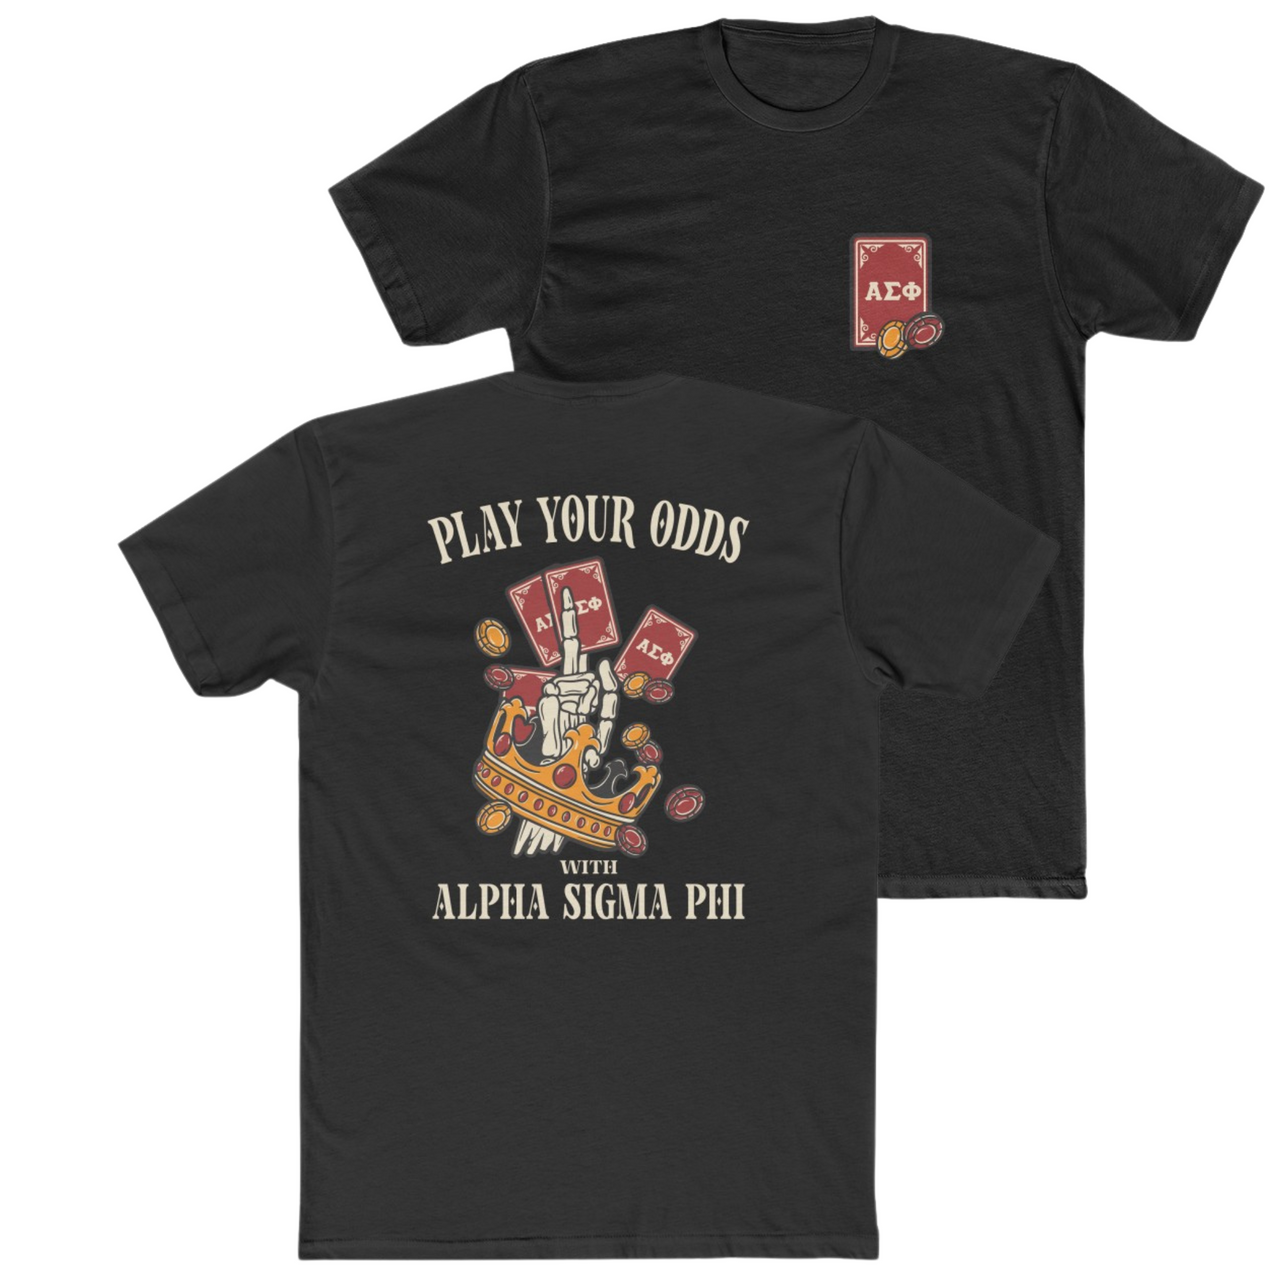 Black Alpha Sigma Phi Graphic T-Shirt | Play Your Odds | Alpha Sigma Phi Fraternity Shirt 